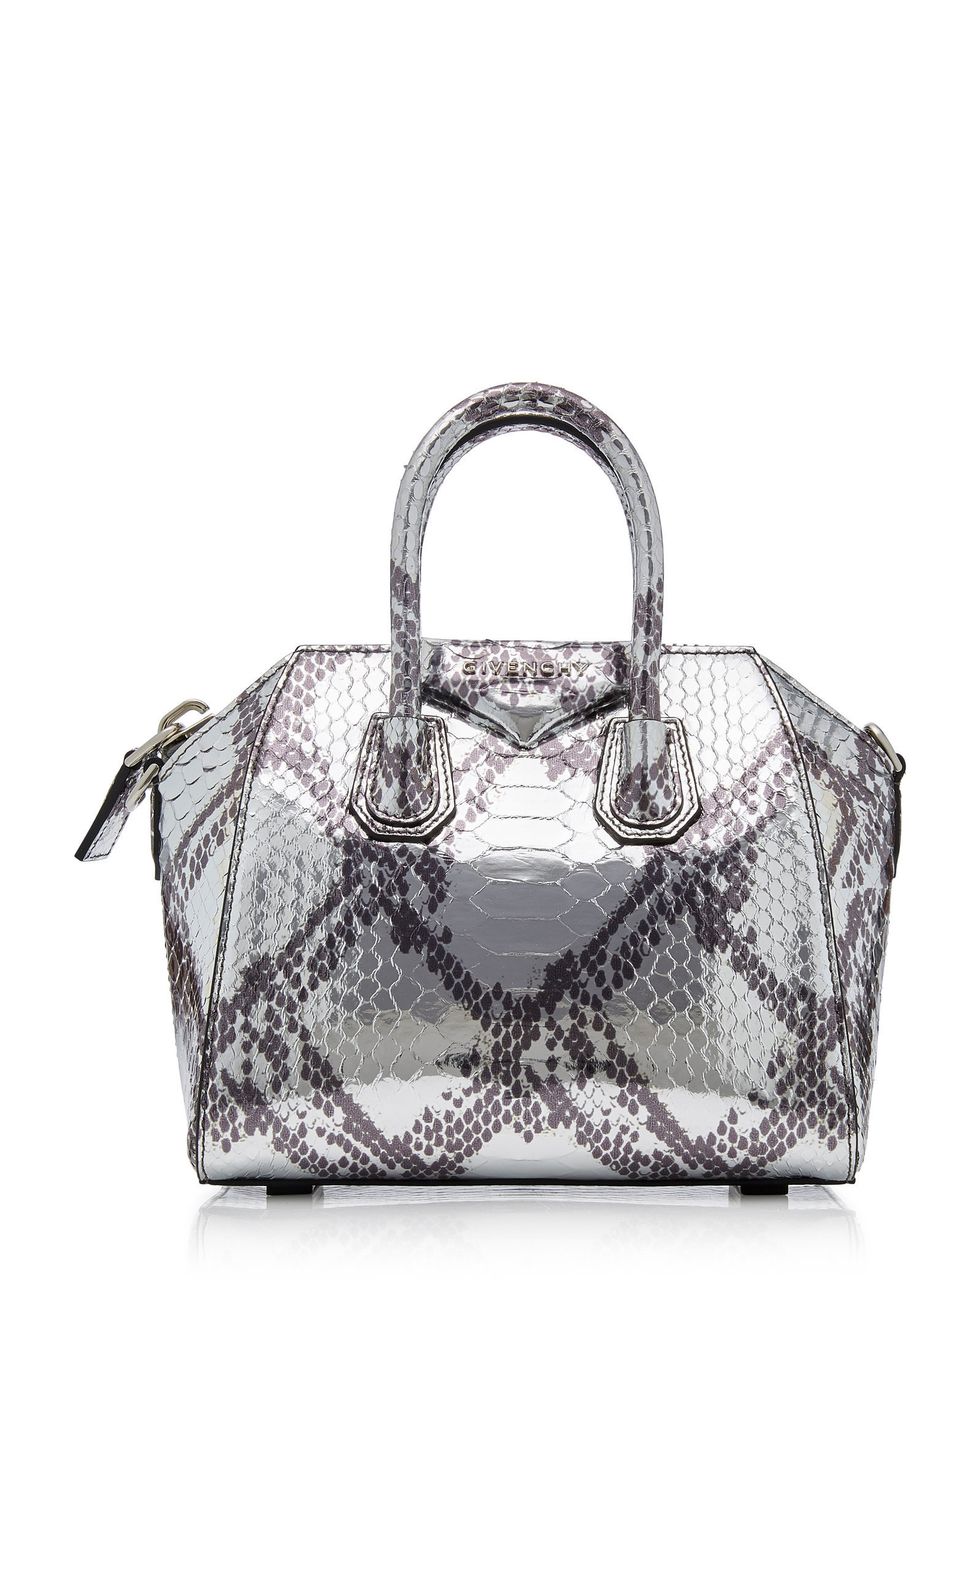 Handbag, Bag, Fashion accessory, Shoulder bag, Material property, Leather, Silver, Beige, Satchel, Luggage and bags, 